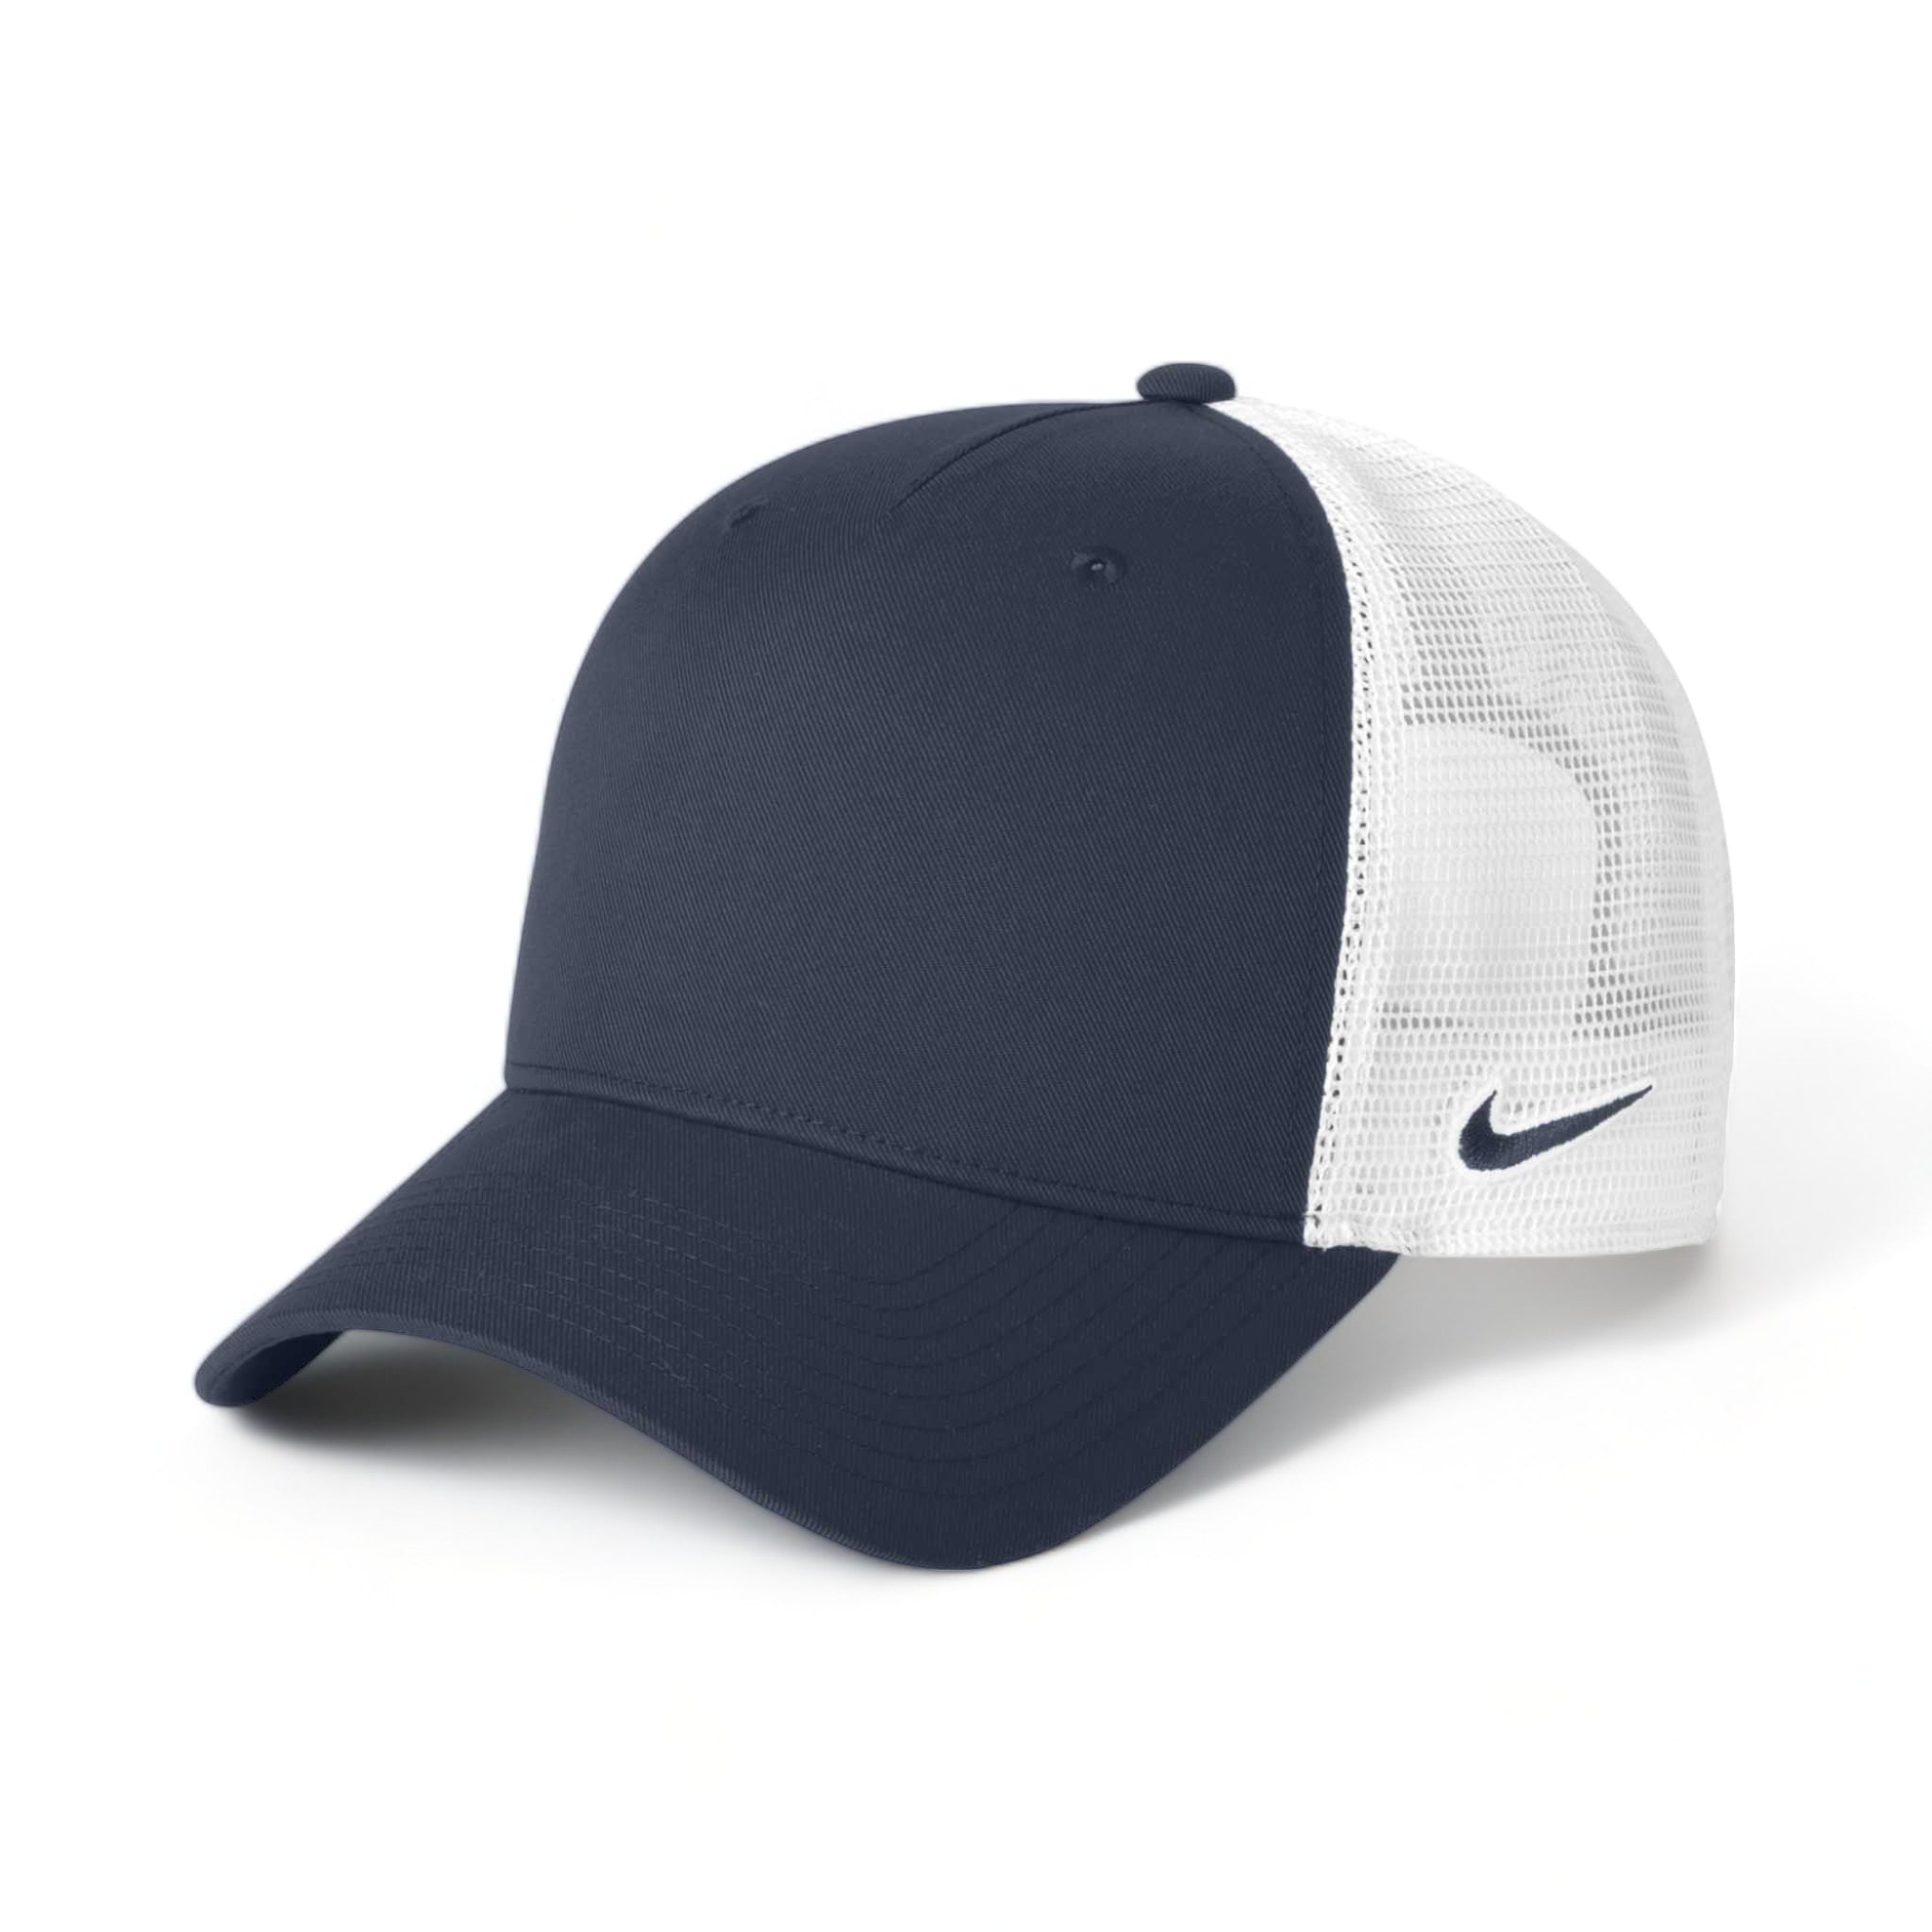 Side view of Nike NKFN9893 custom hat in navy and white